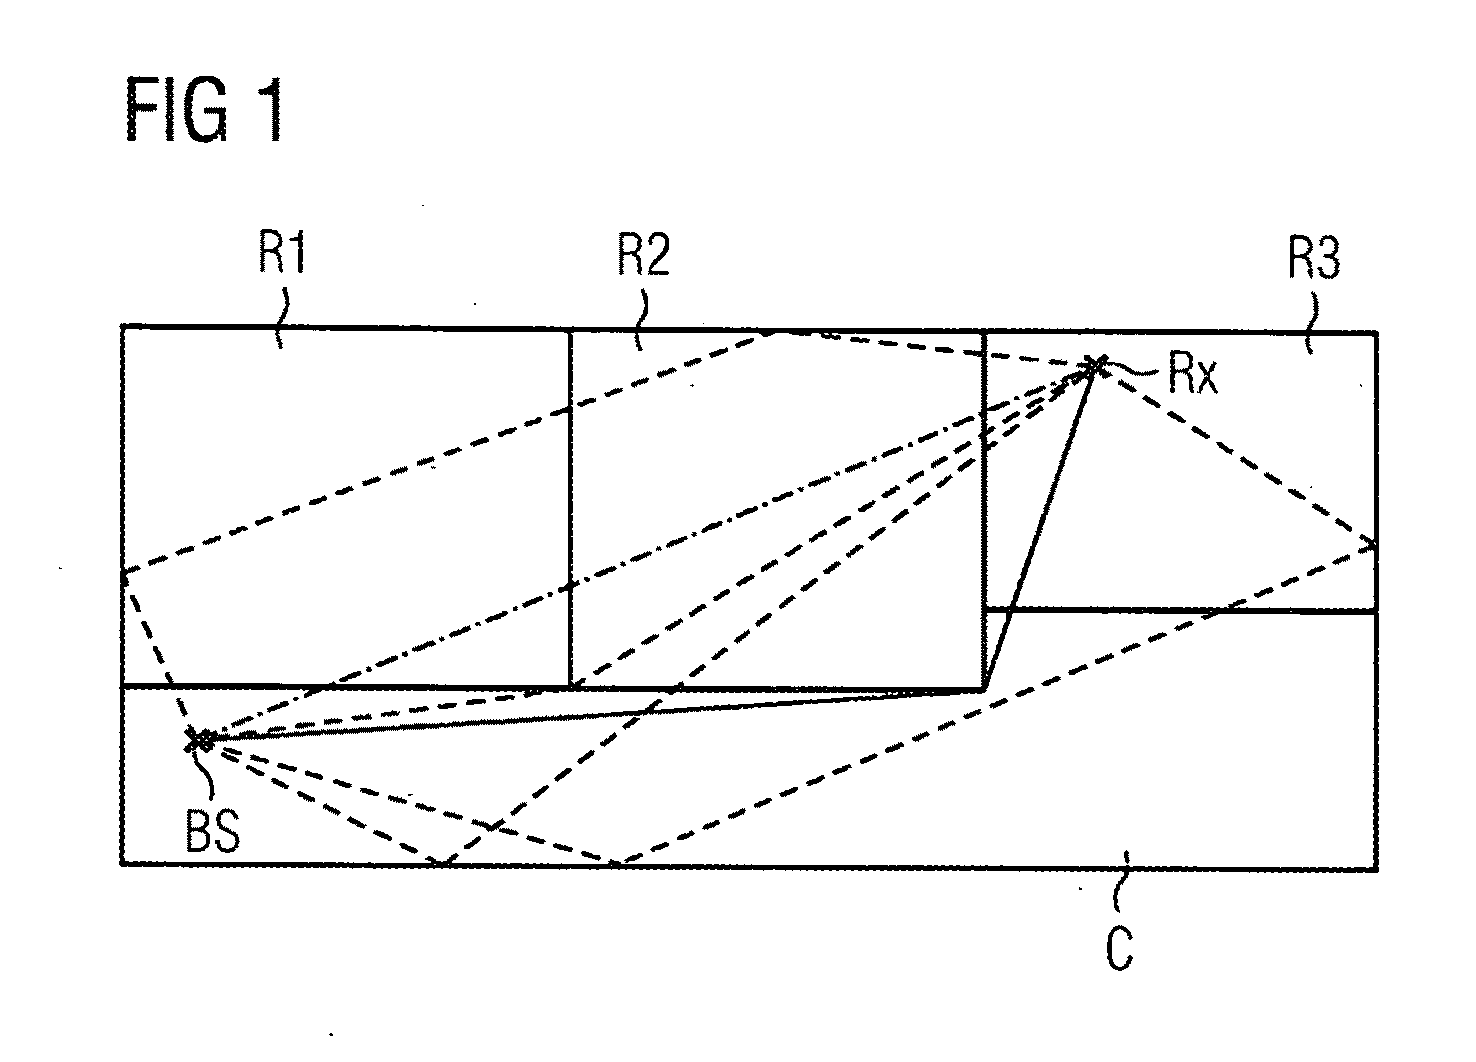 Method and Apparatus for Determining the Location of a Mobile Object